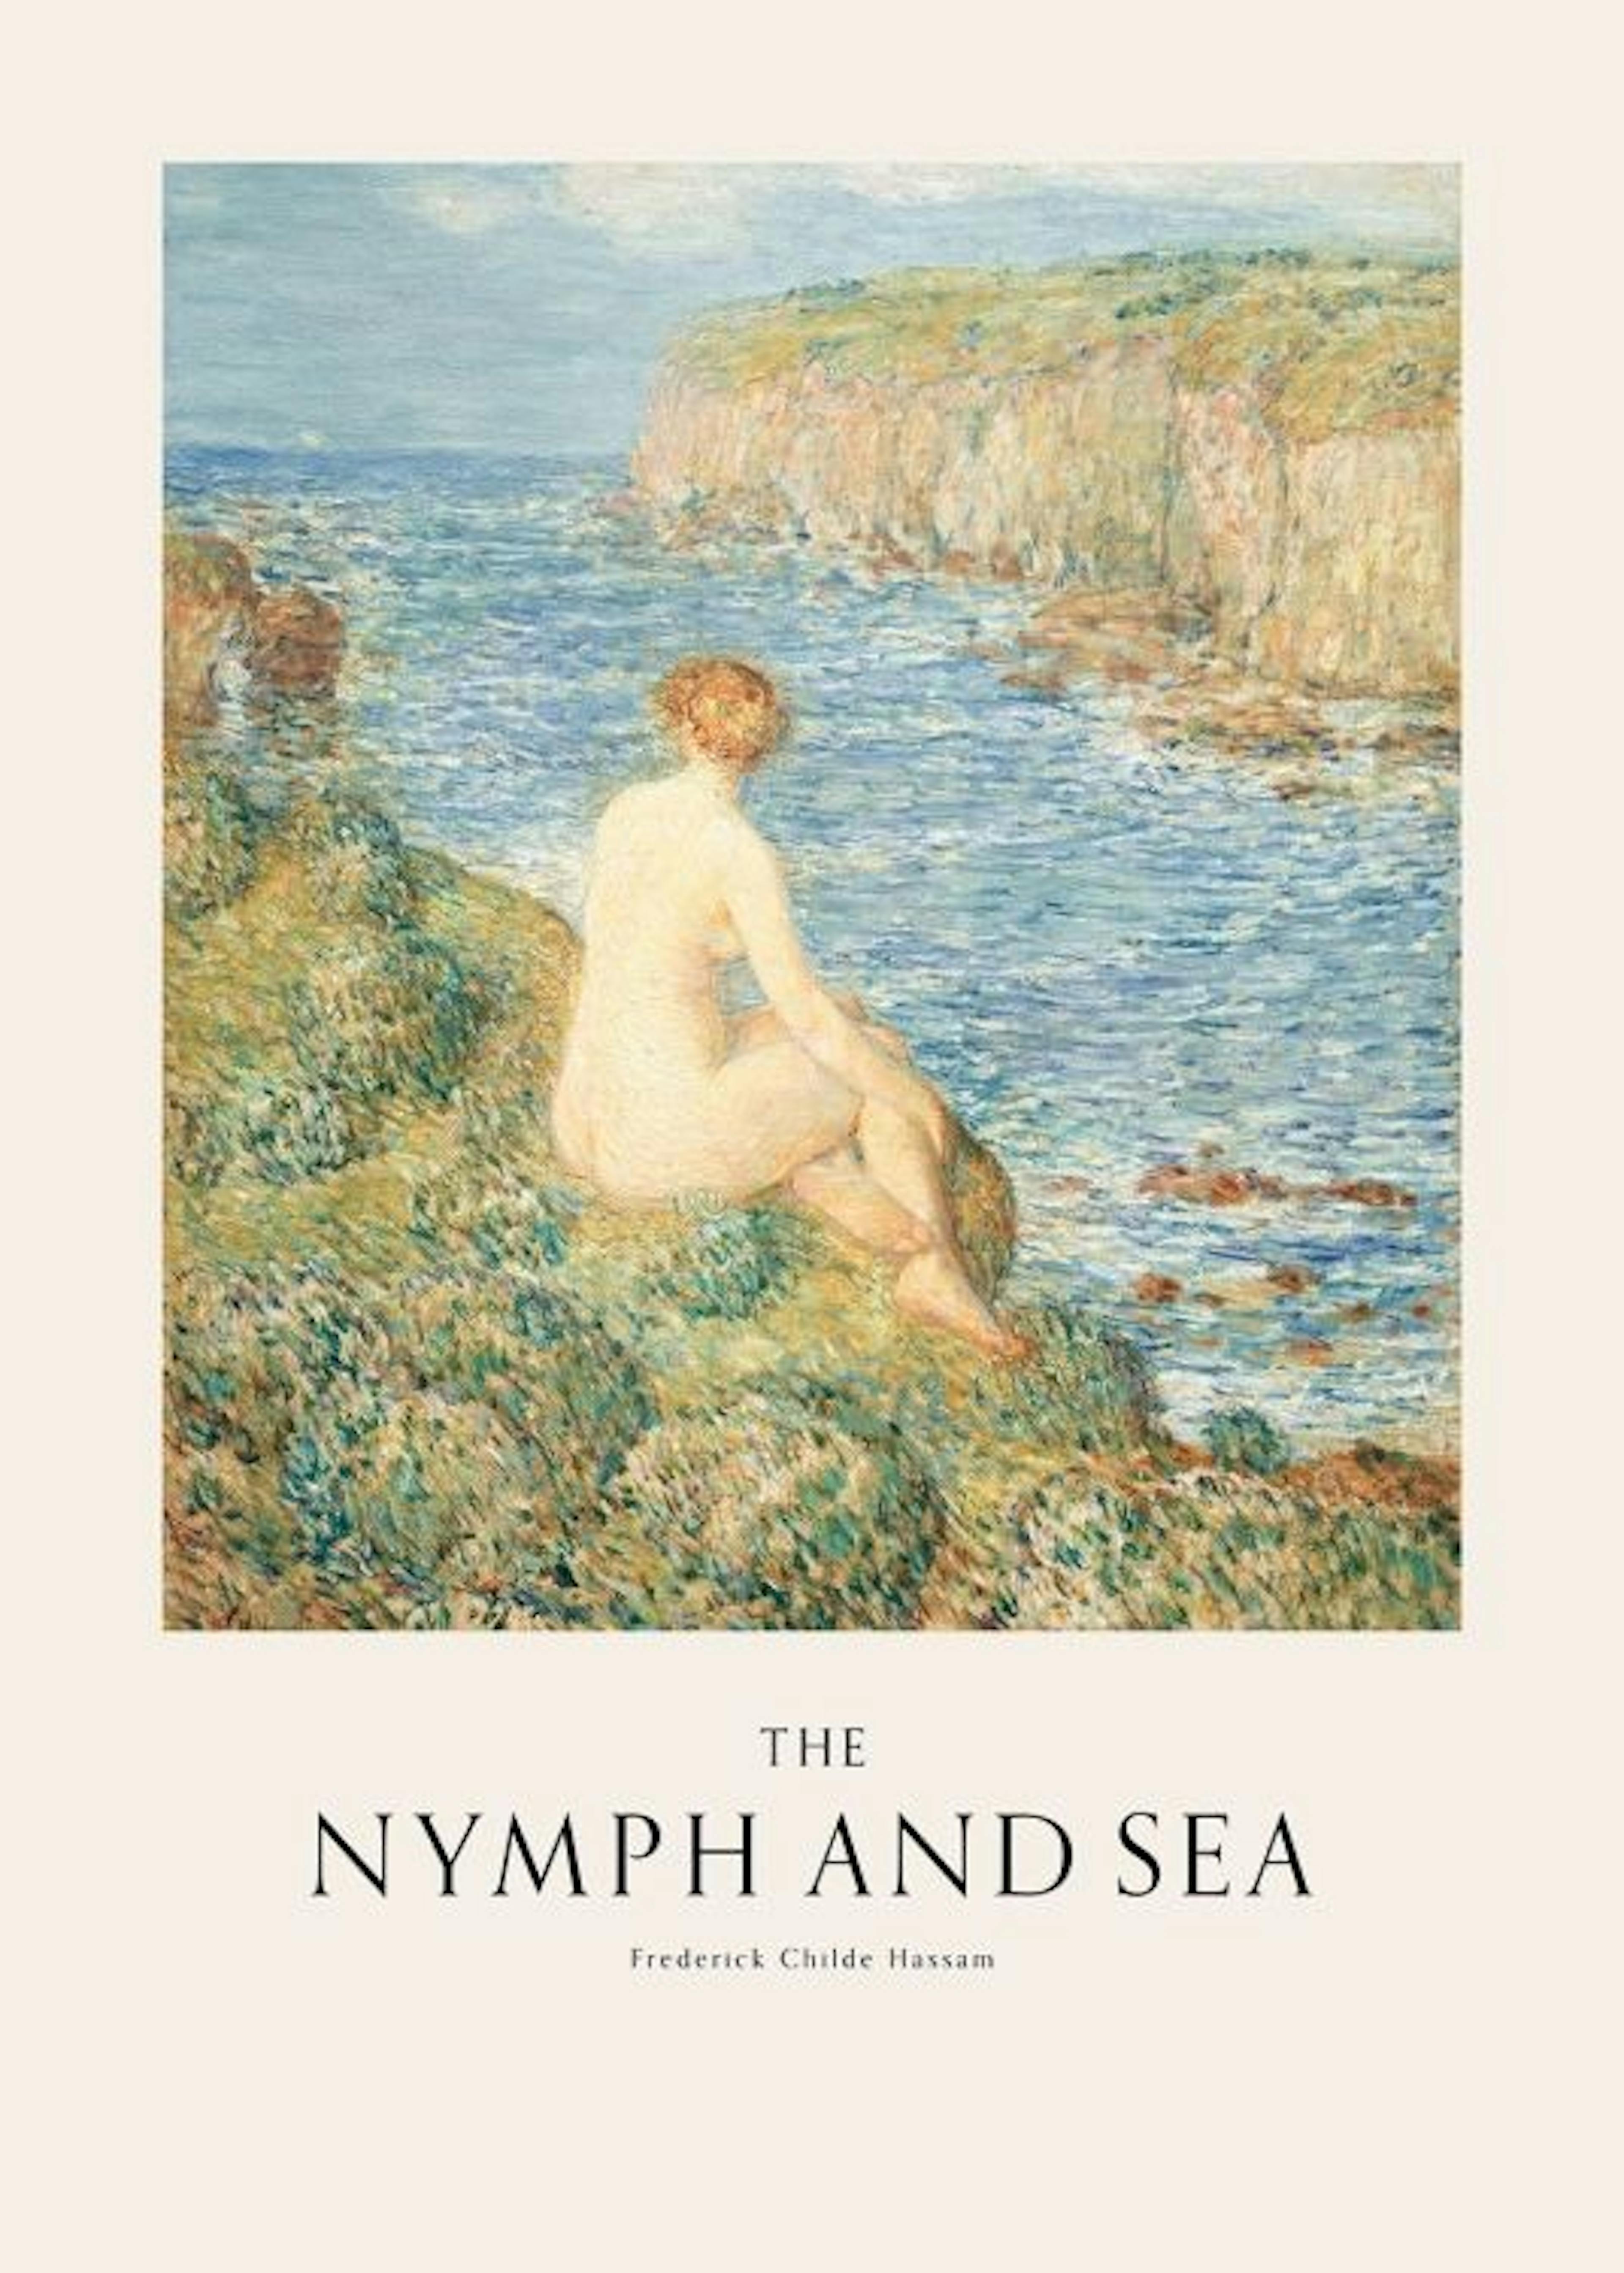 Frederick Childe Hassam - The Nymph and Sea Poster 0